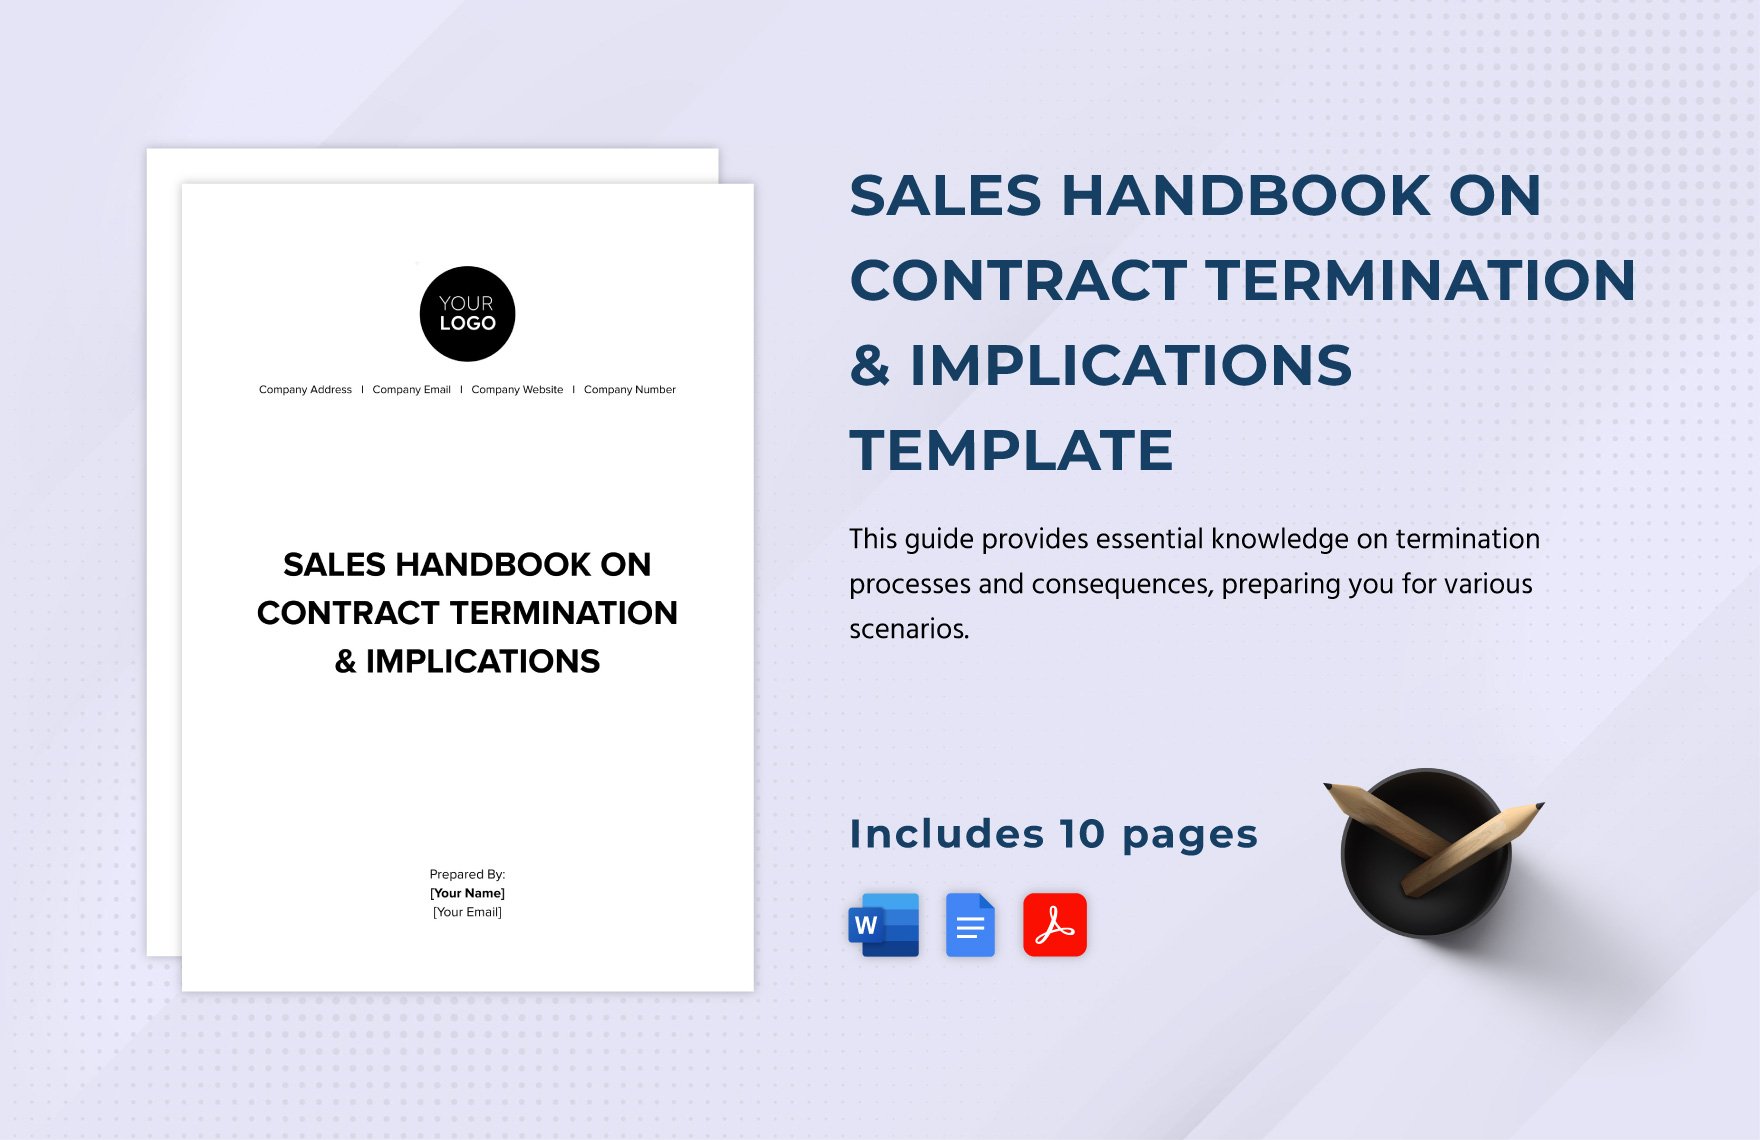 Sales Handbook on Contract Termination & Implications Template in Word, Google Docs, PDF